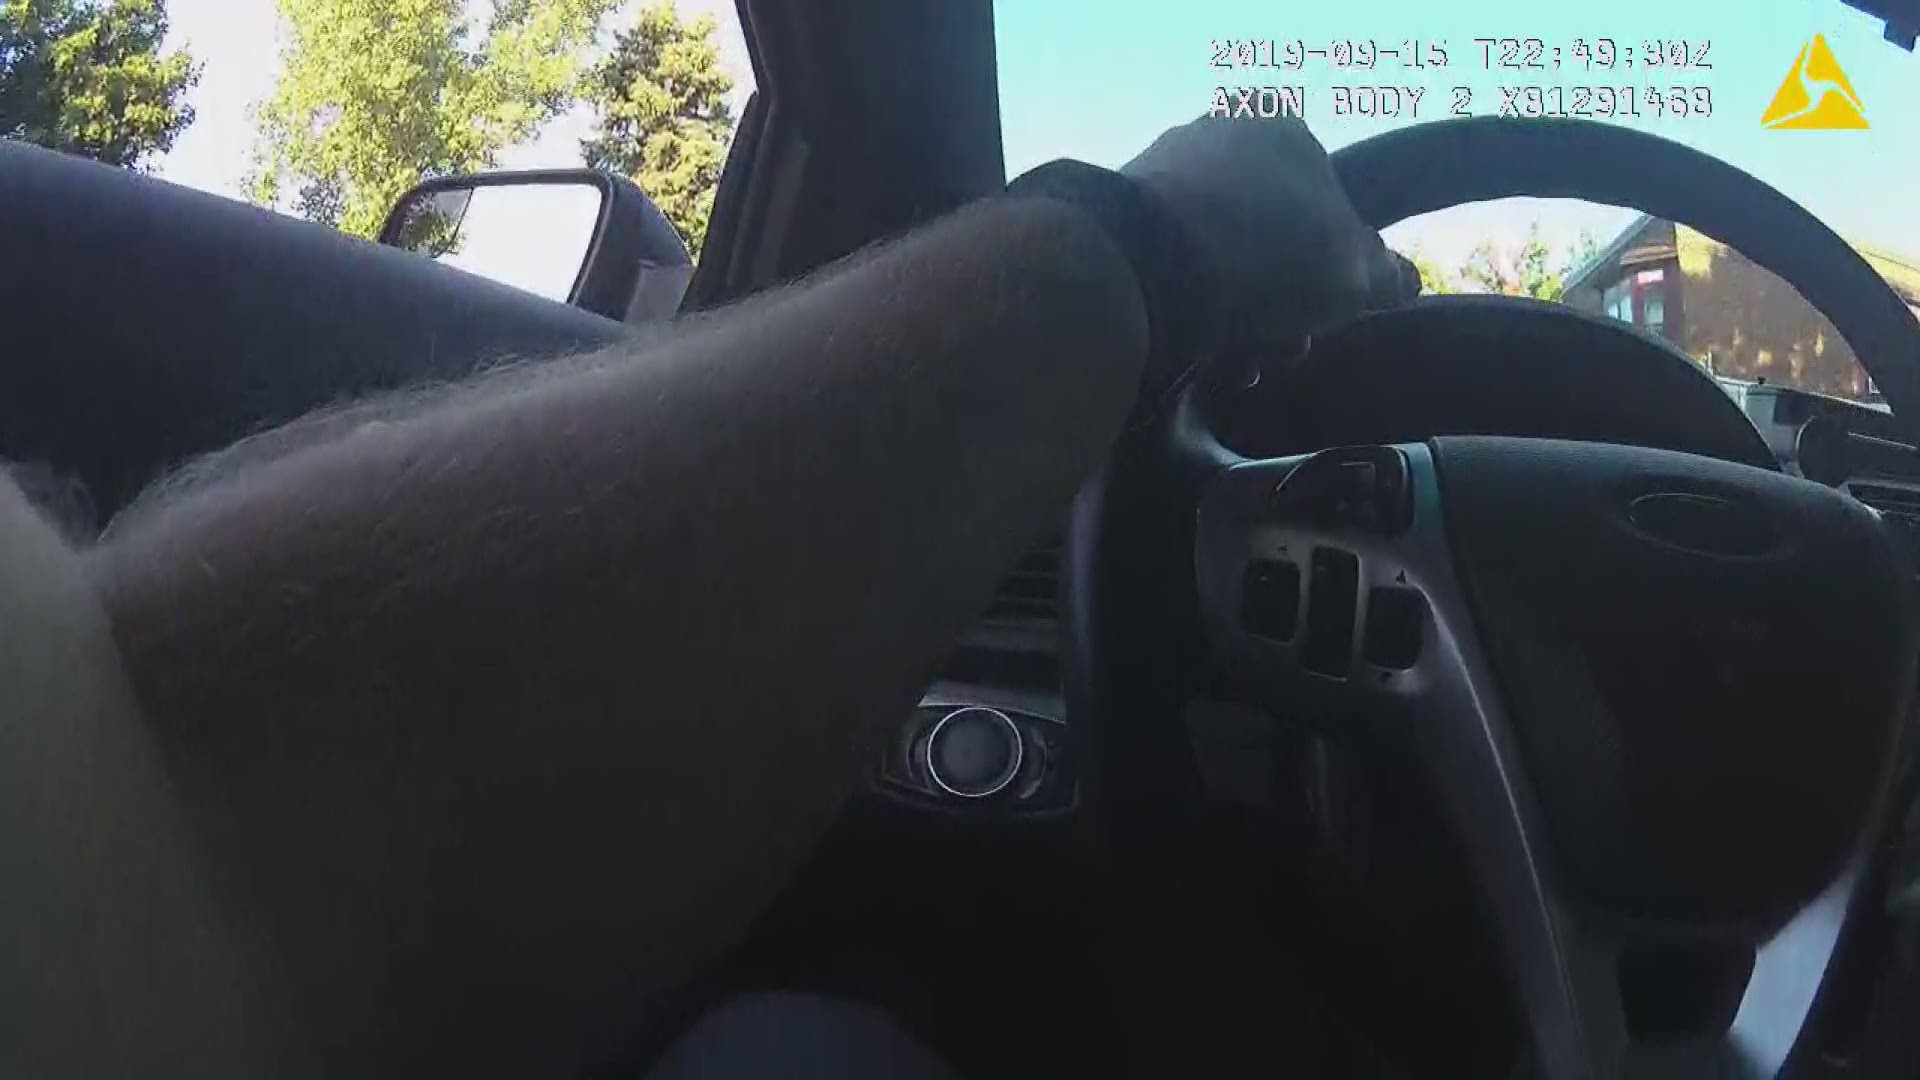 Bodycam video shows the fatal officer-involved shooting of Ronald Davis. Editor's note: This video has been edited for graphic content and for obscenity.